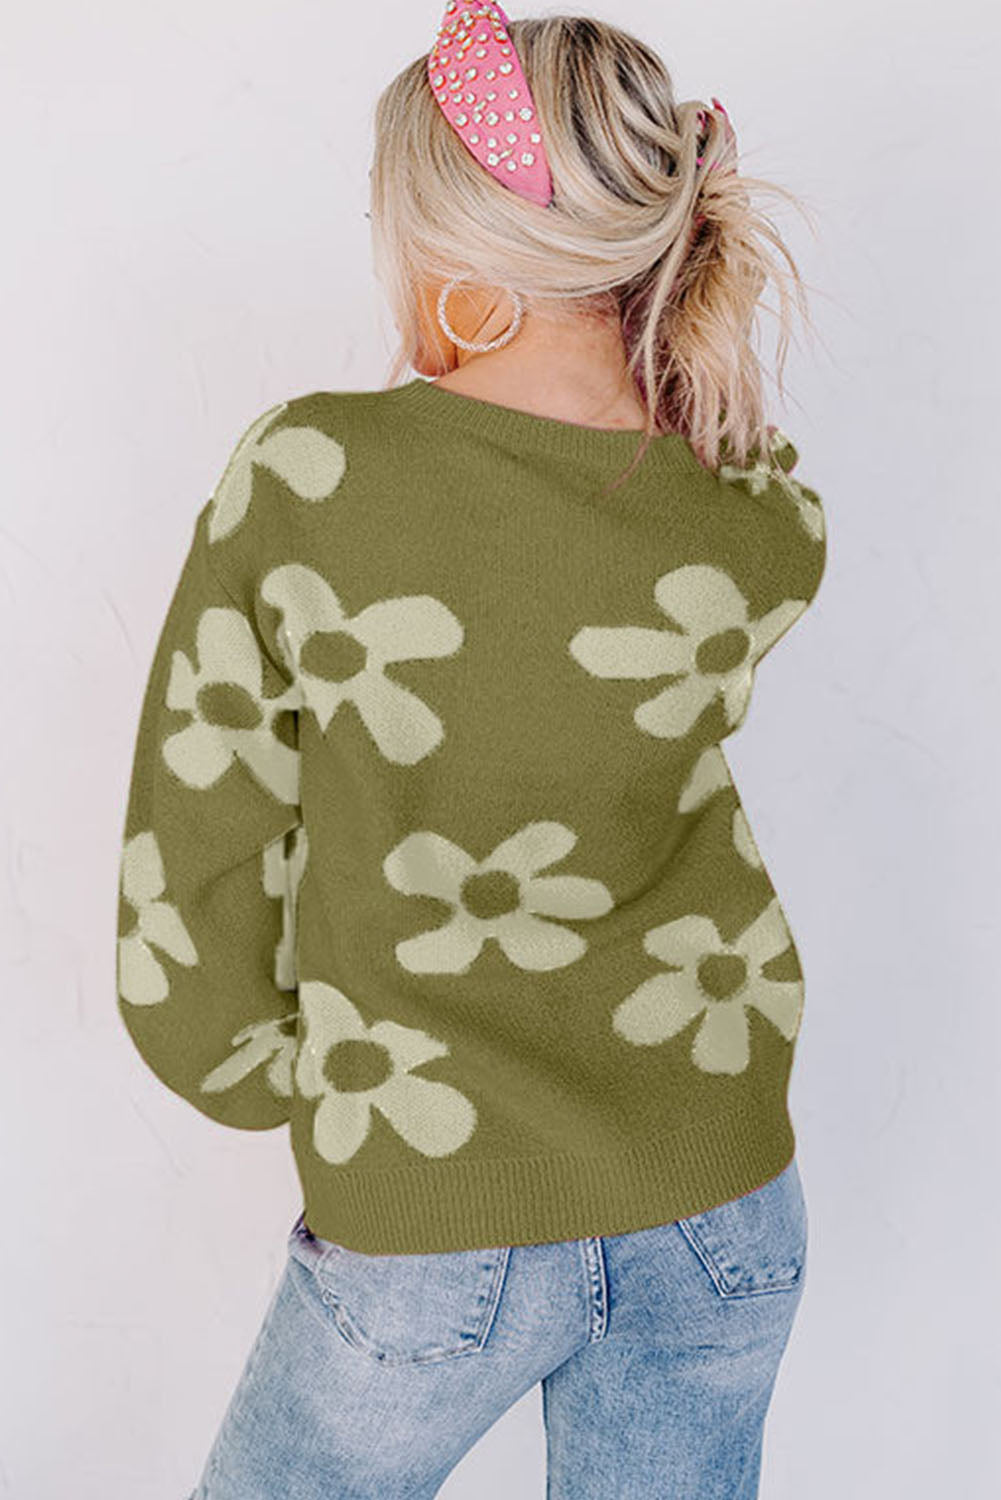 - Floral Print Knitted Long Sleeve Pullover Sweater - 2 colors - Womens Sweaters at TFC&H Co.